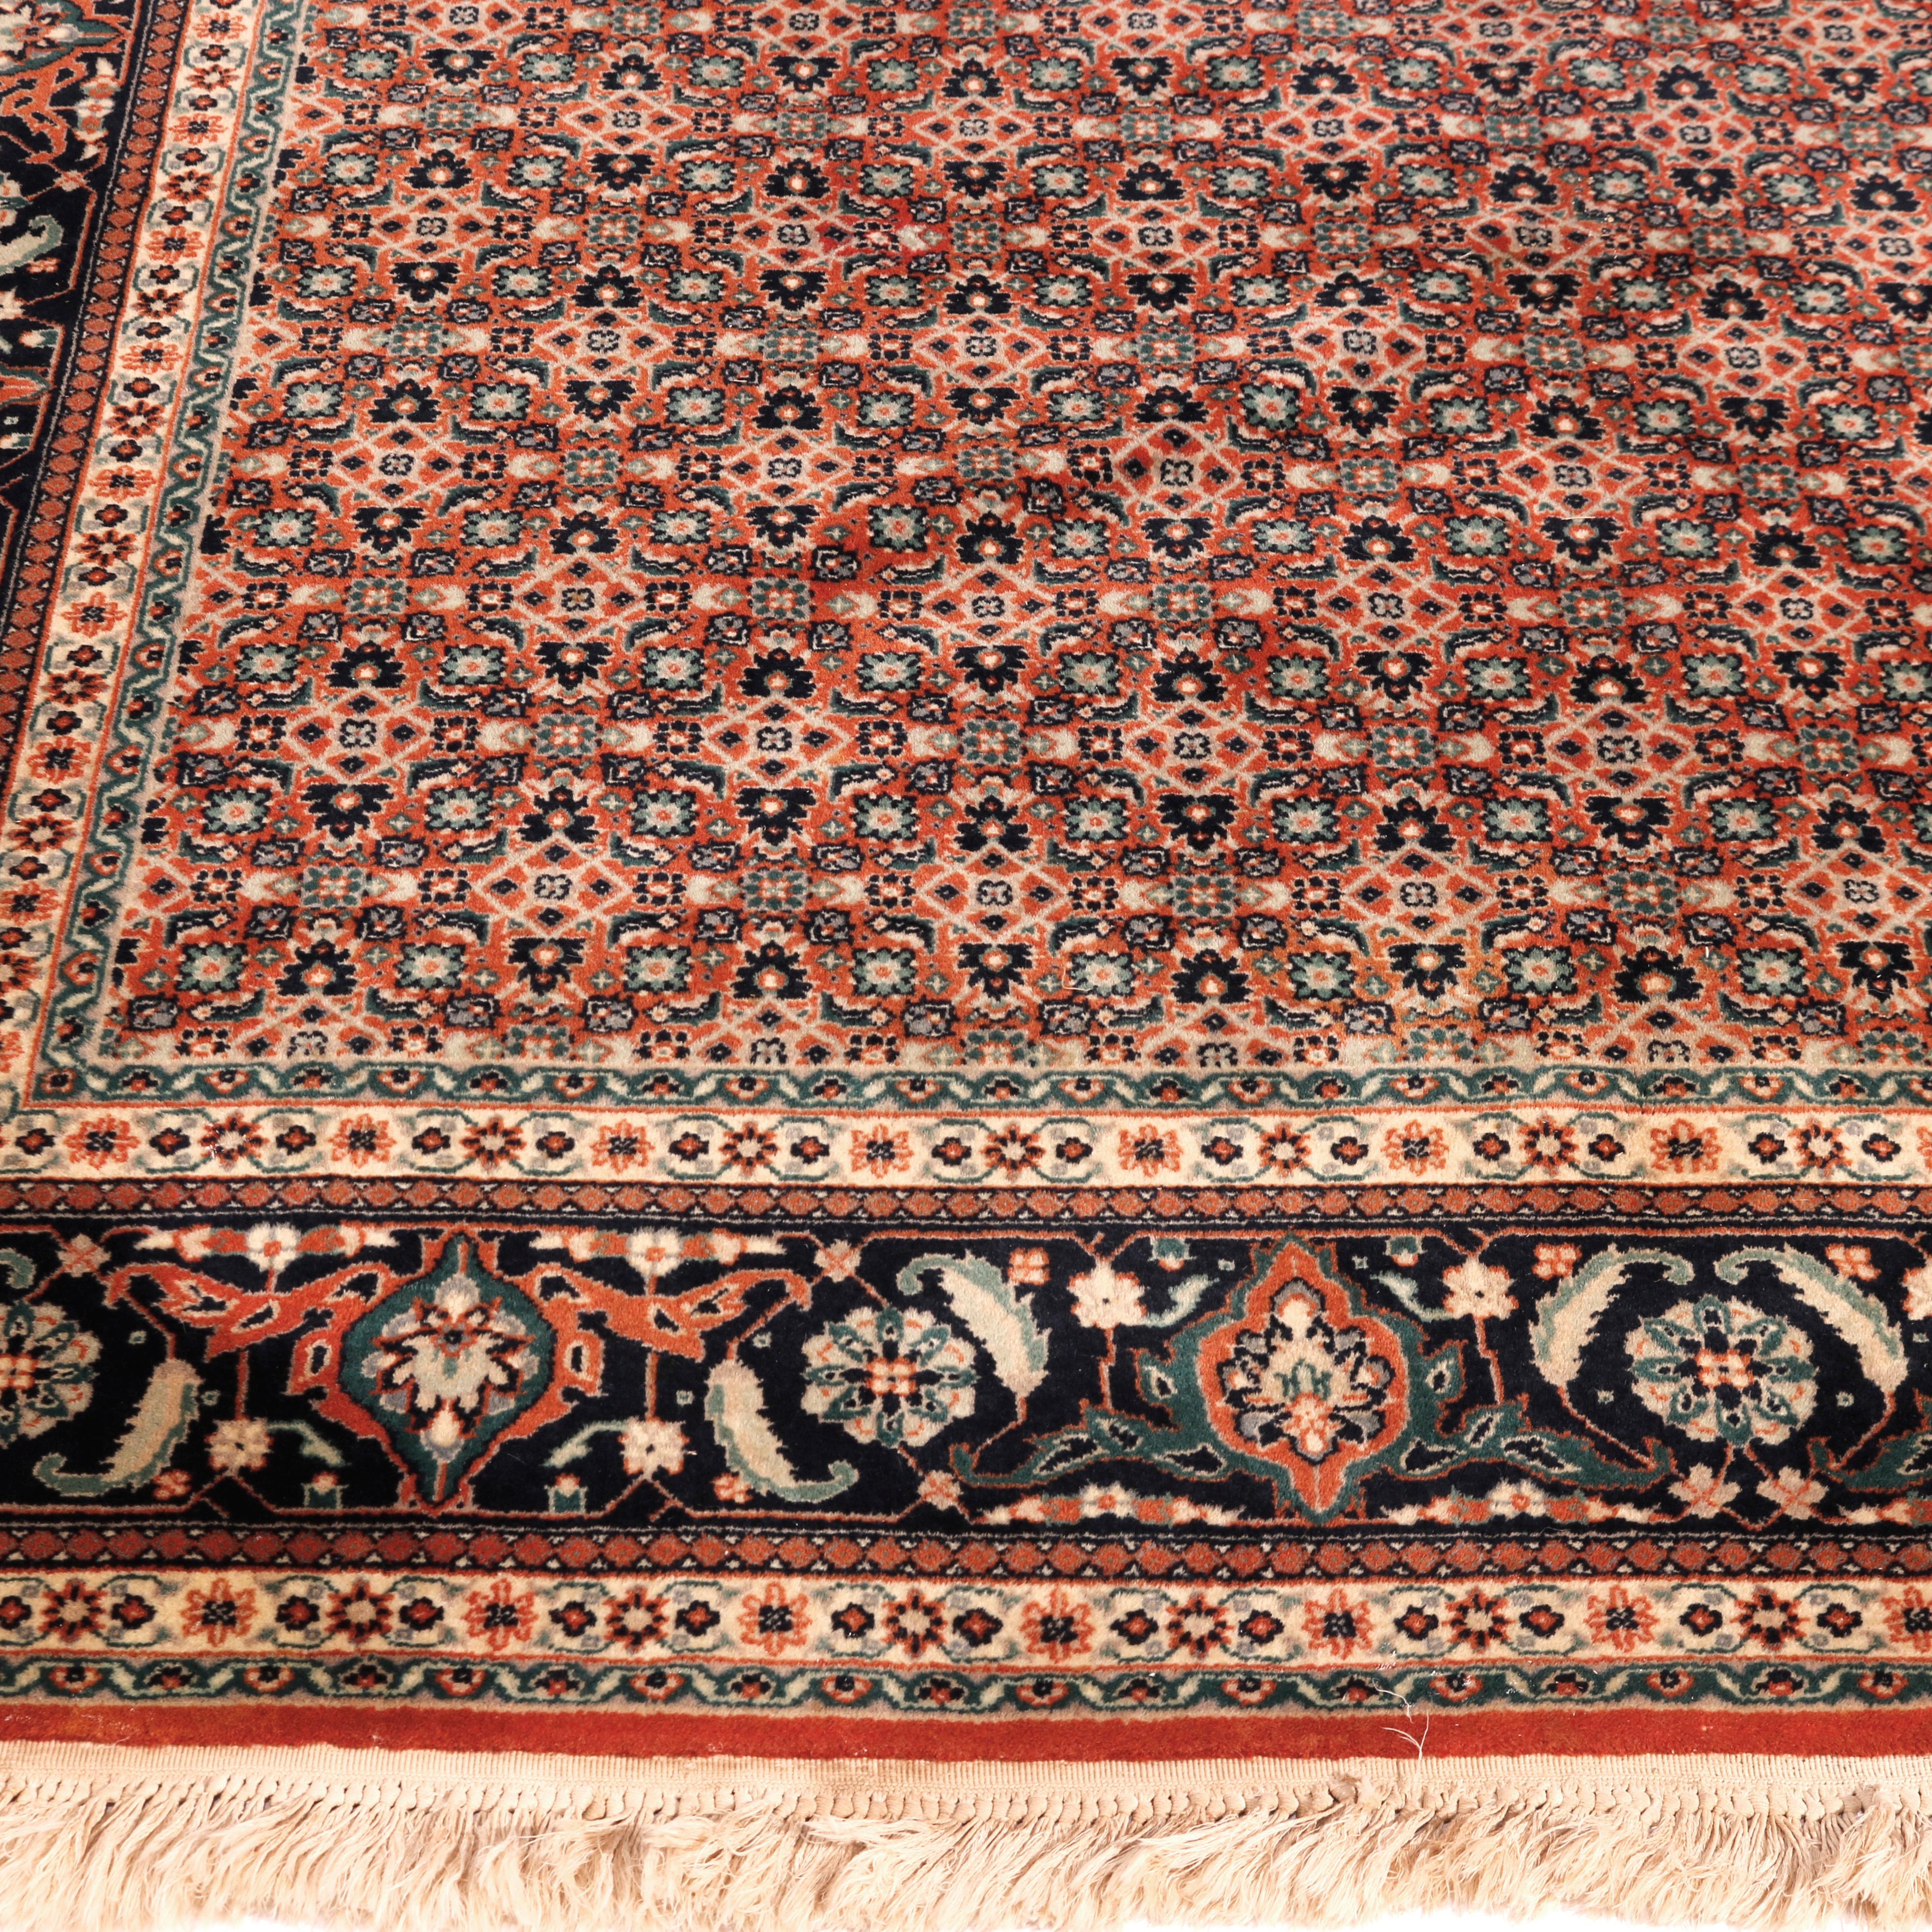 A Kashan room size oriental rug offers wool construction with allover floral design, circa 1950

Measures - 113